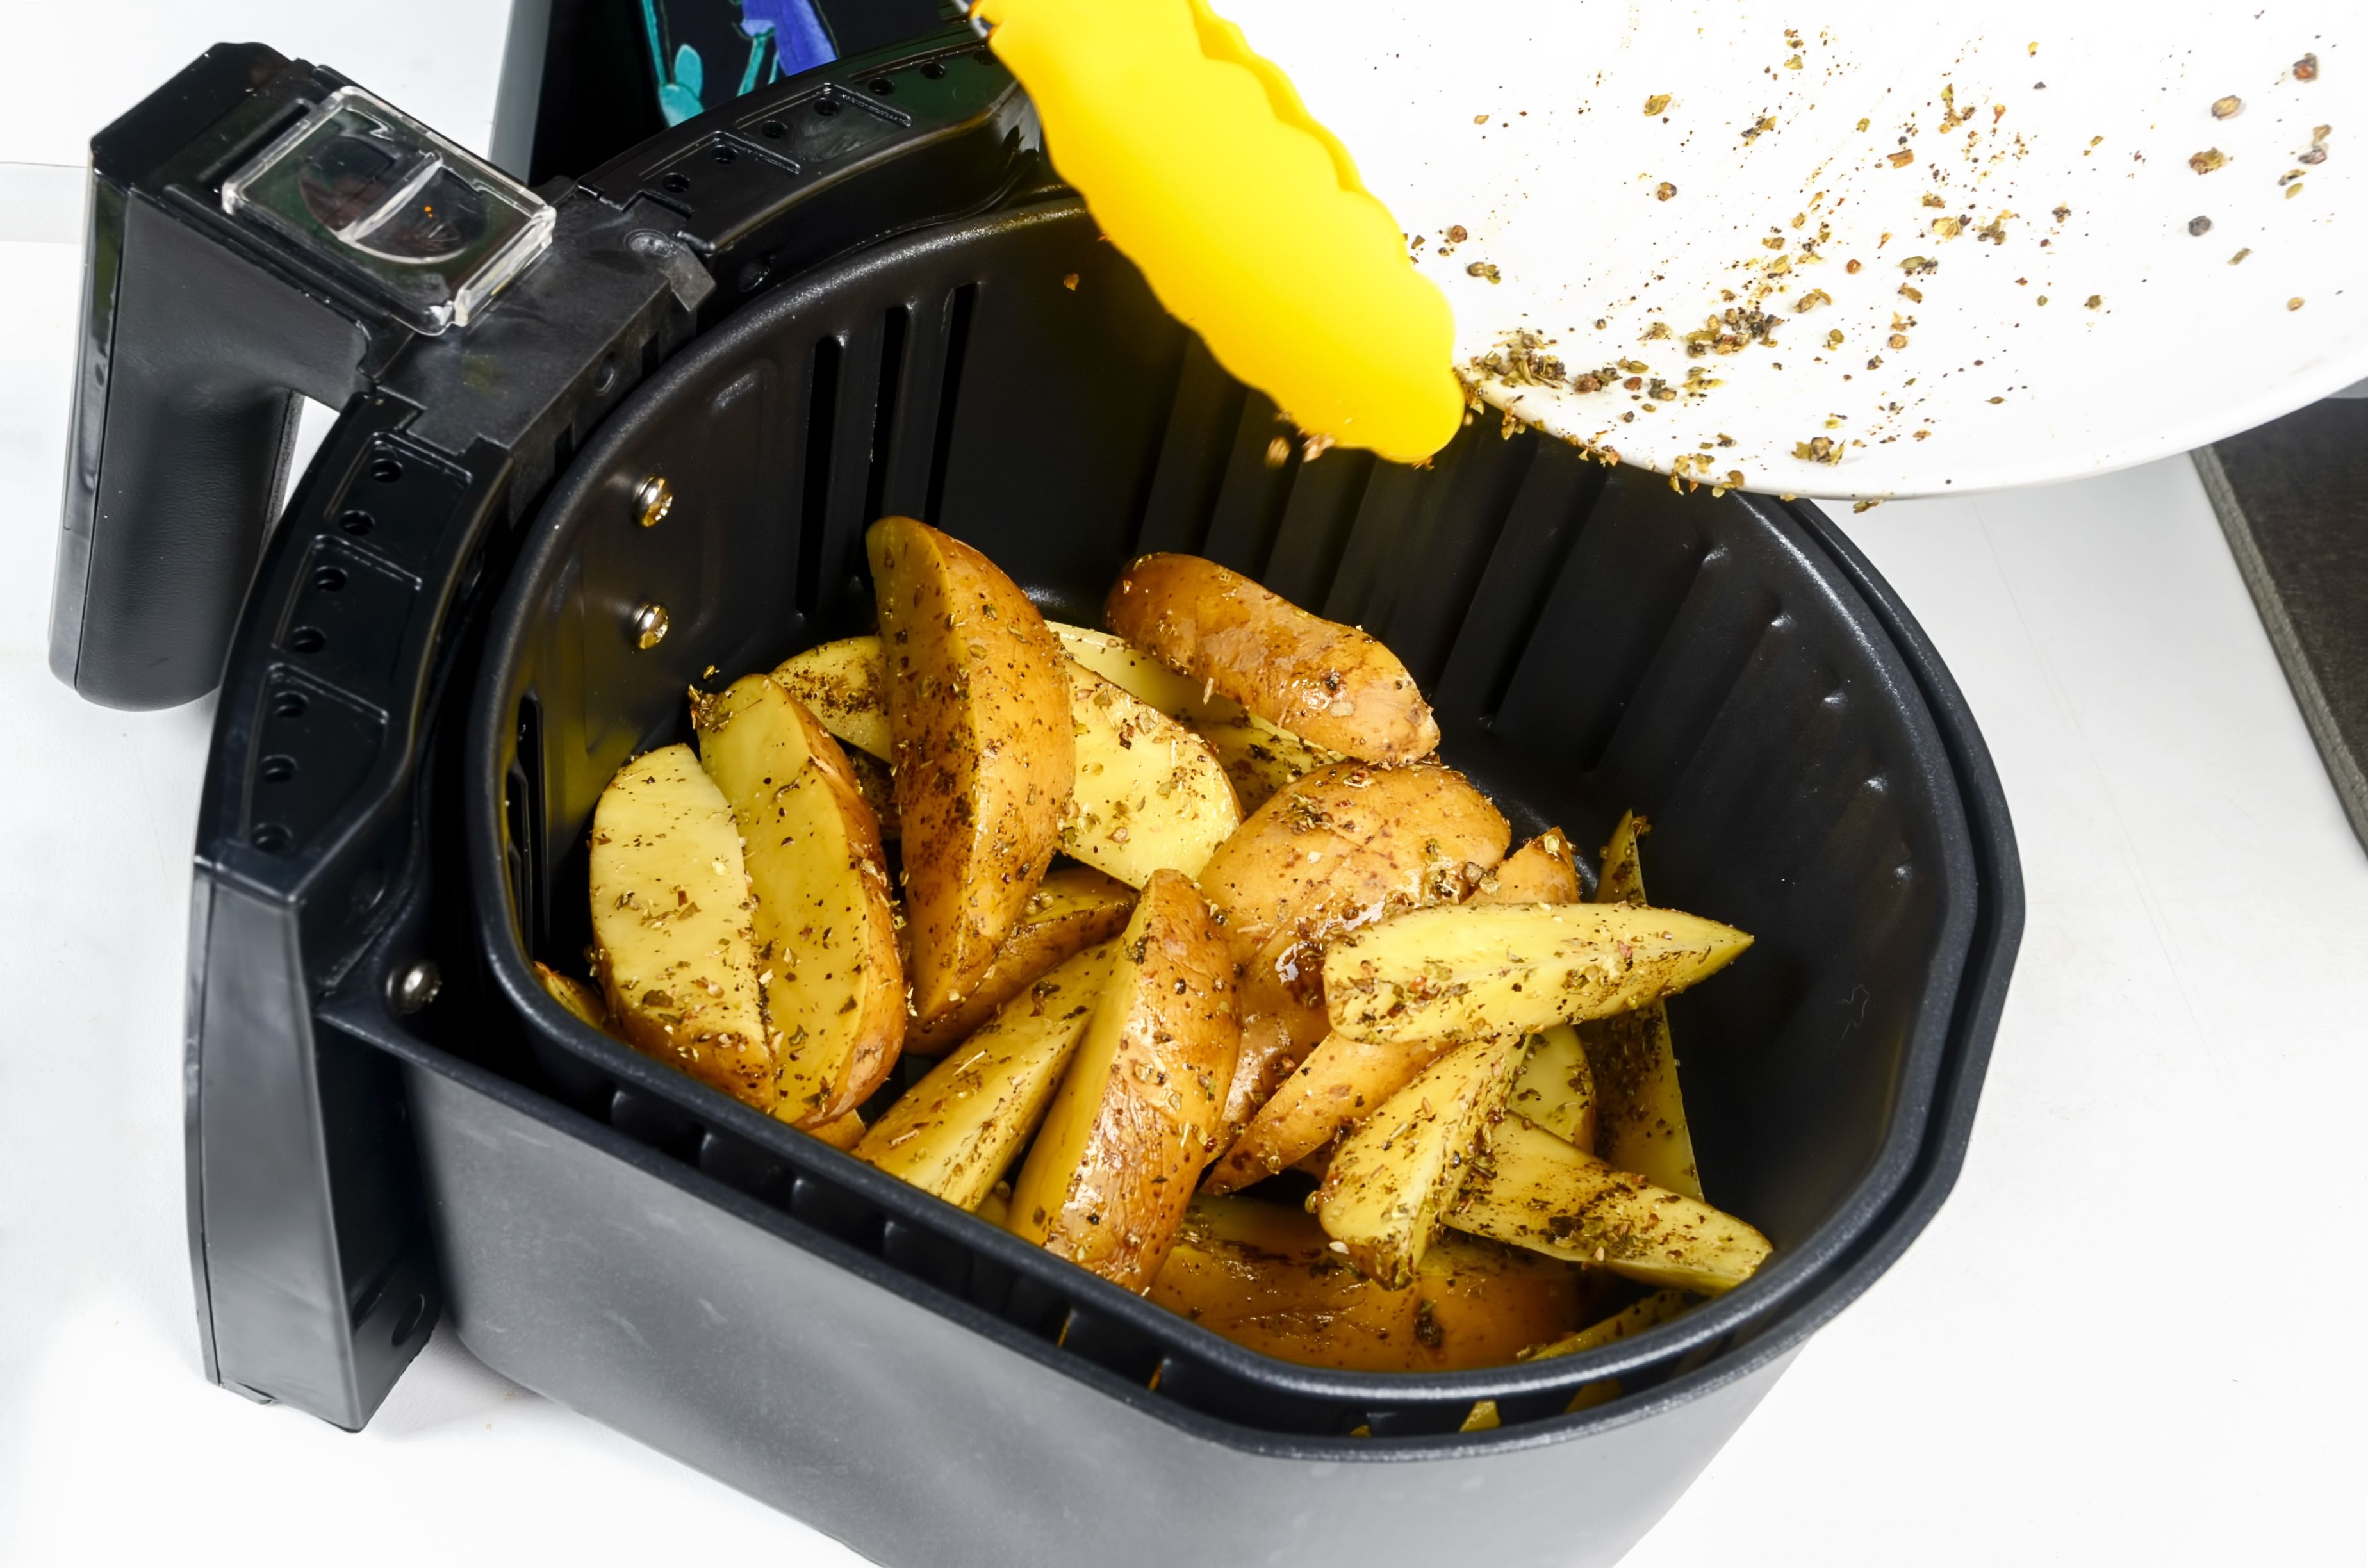 https://hips.hearstapps.com/hmg-prod/images/air-fryer-grill-potato-at-home-isolated-on-white-royalty-free-image-1663100857.jpg